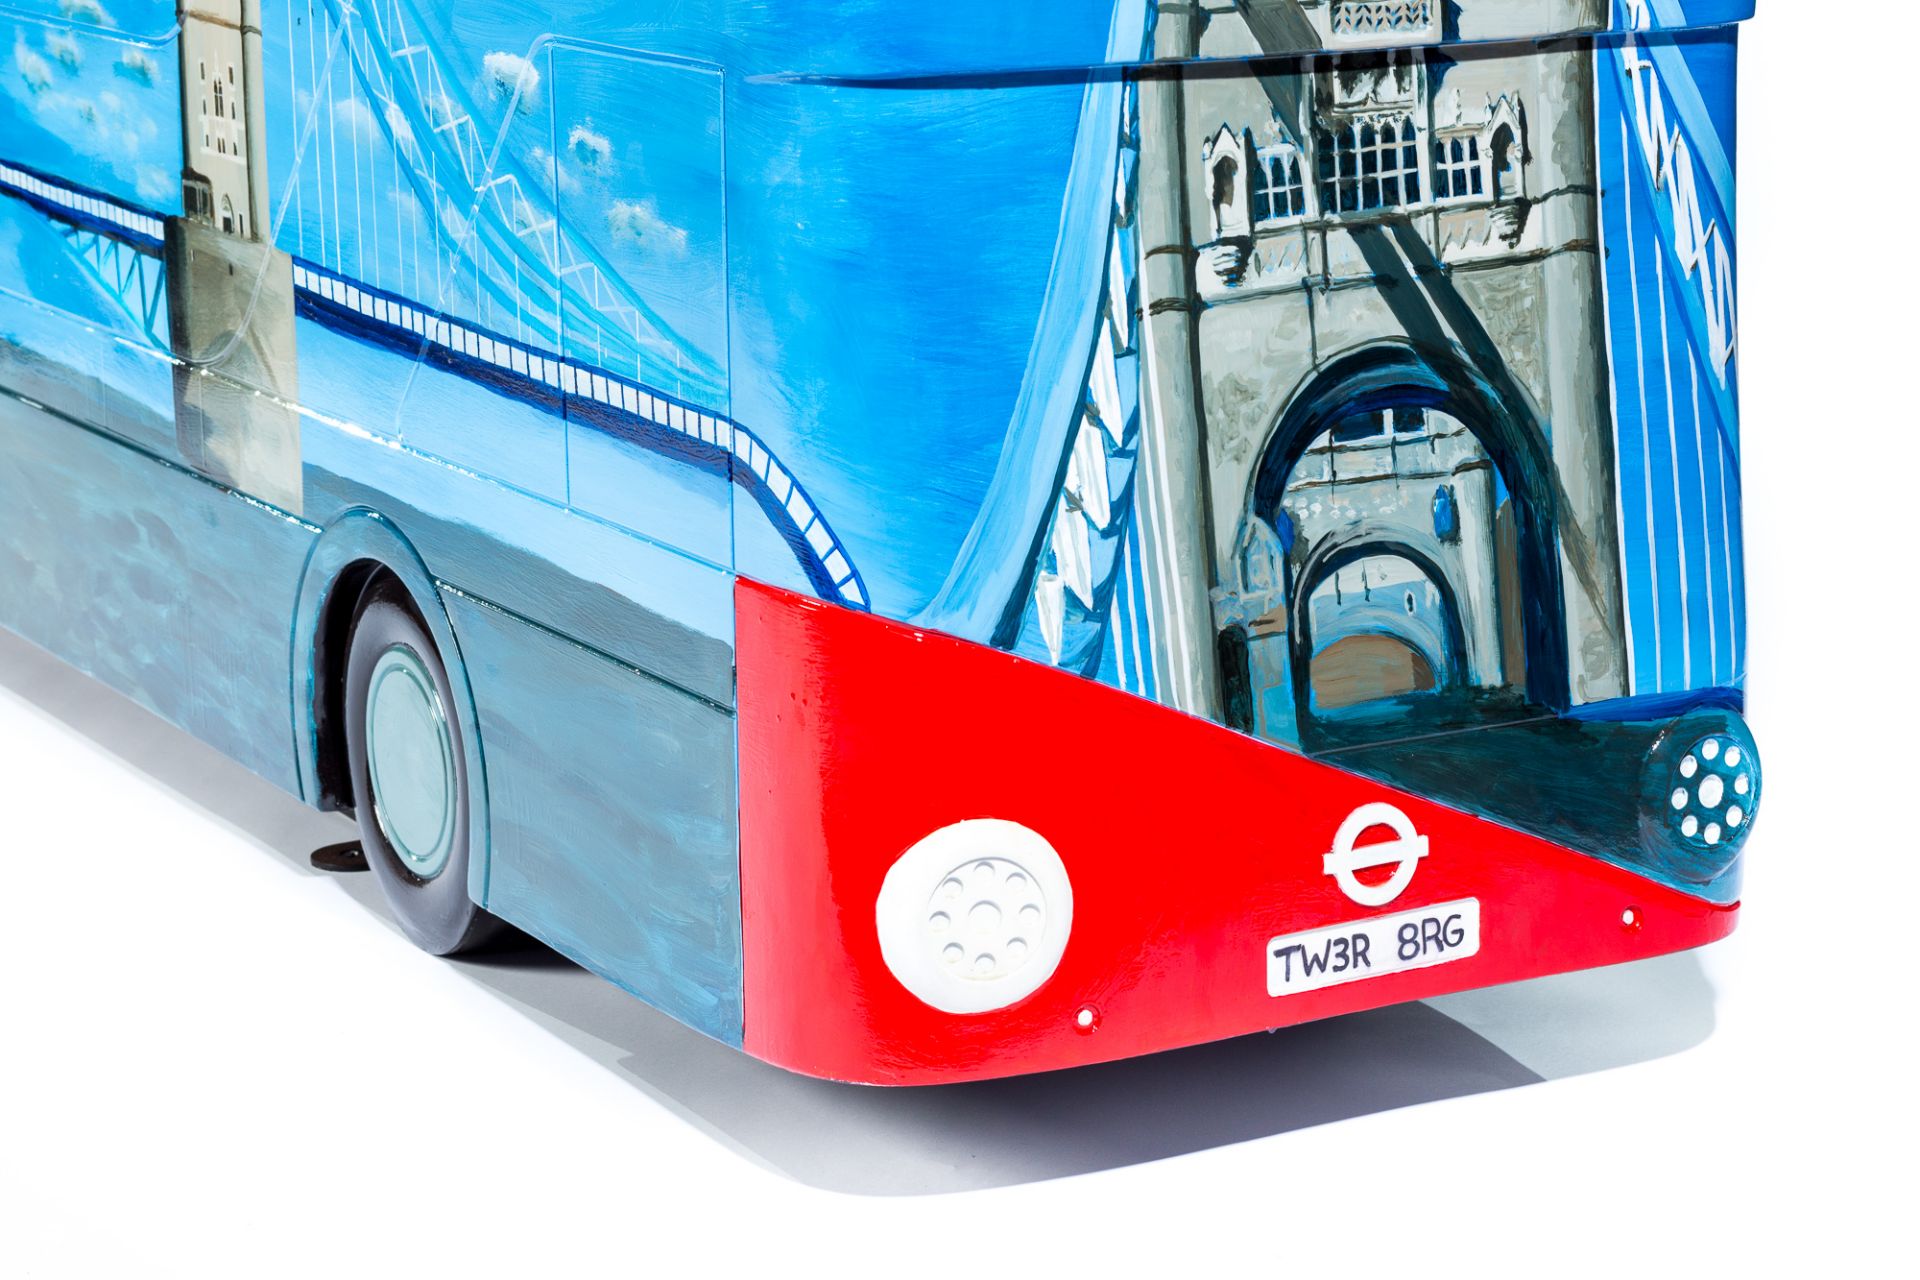 Artist: Michelle Heron  Design: Tower Bridge Bus    About the artist   Michelle was born and - Image 3 of 3